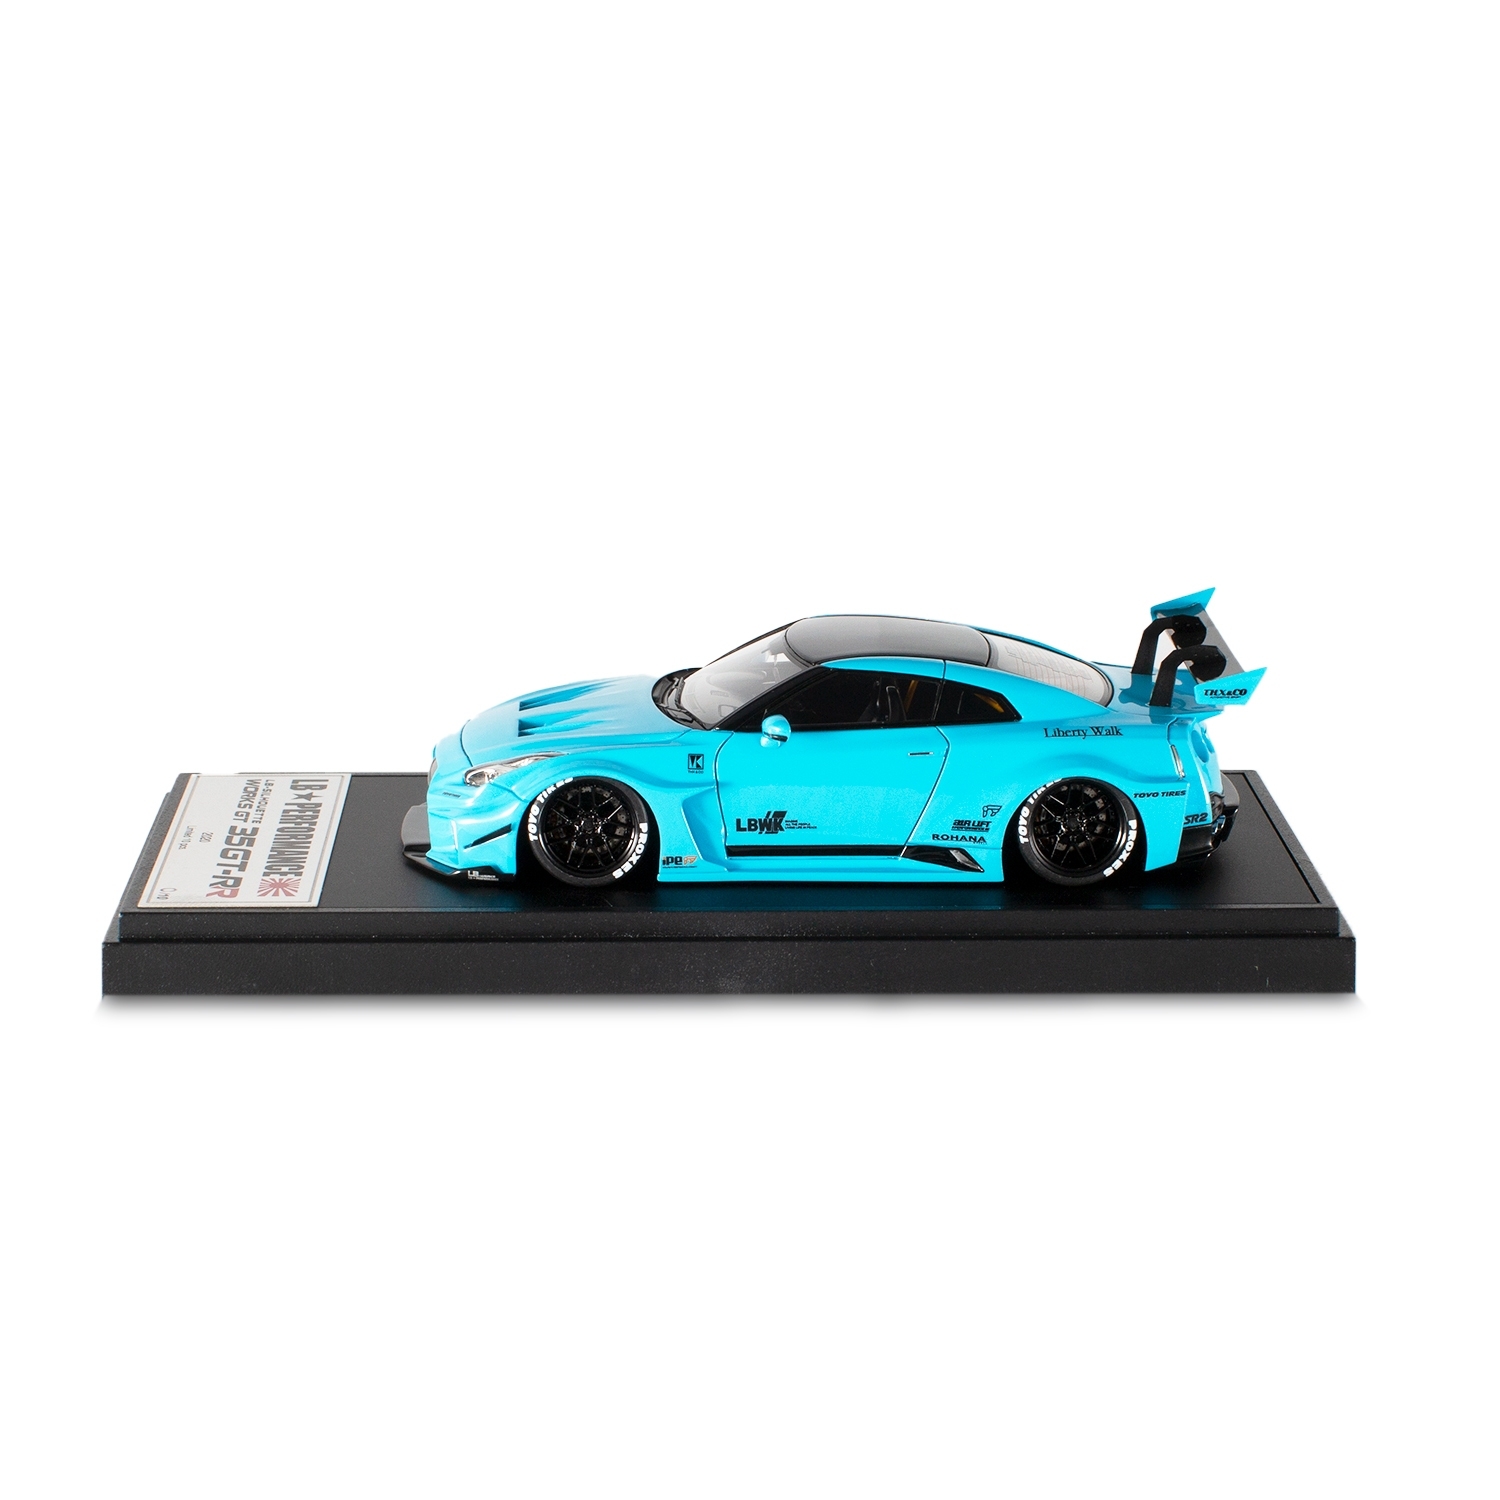 Make Up 1/43 LB-Silhouette WORKS GT 35GT-RR GT Wing ver. Pearl 